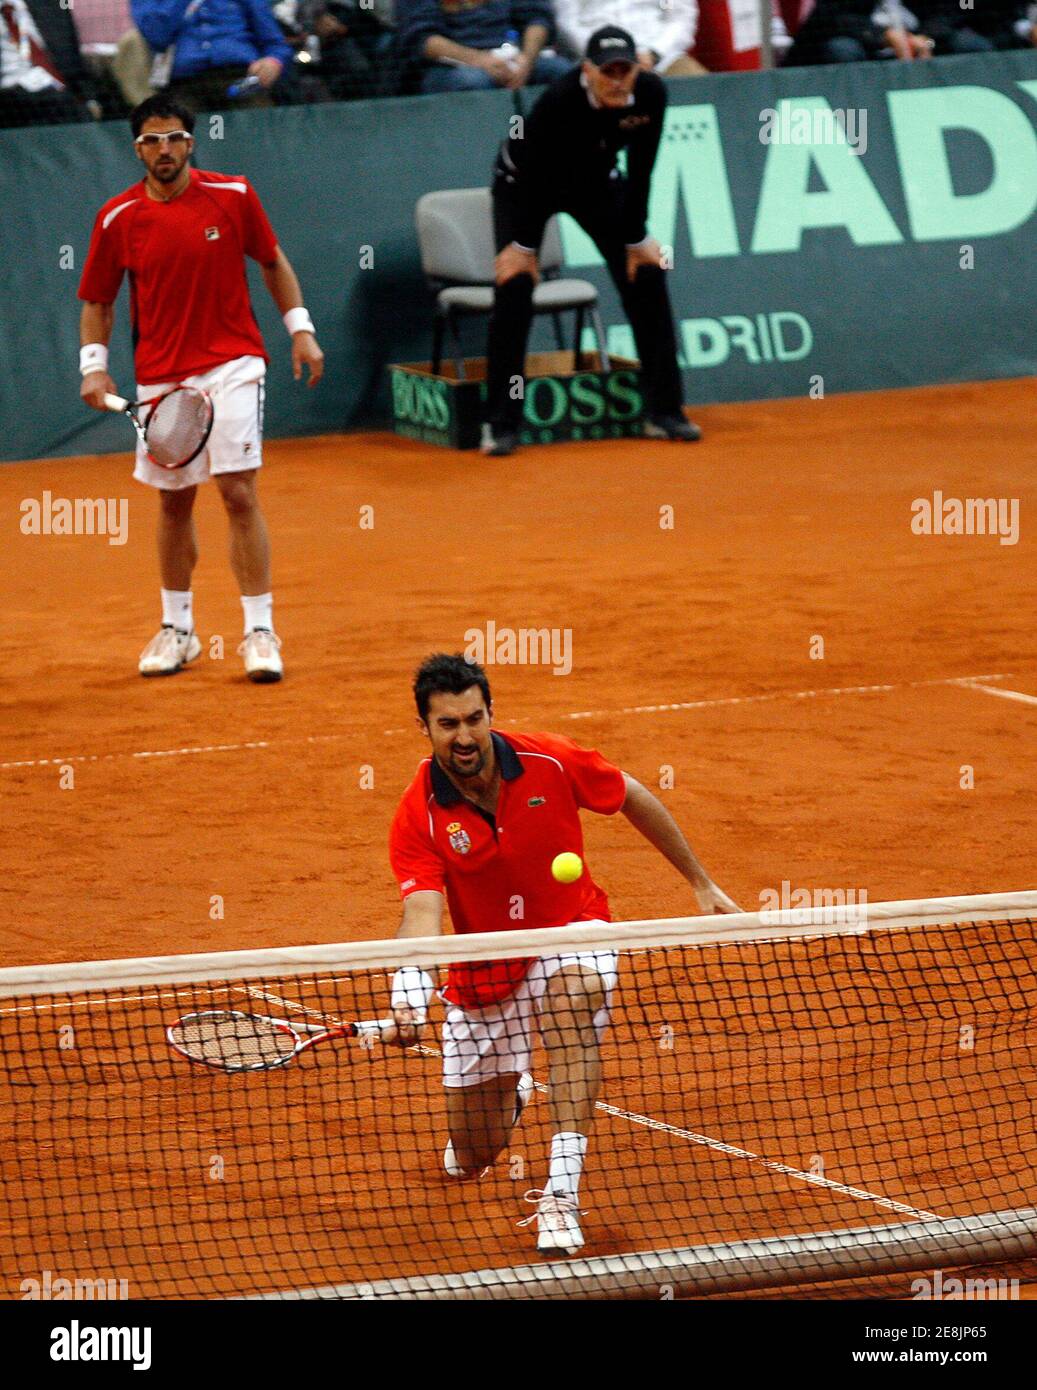 Serbia's Nenad Zimonjic (bottom) and Janko Tipsarevic play against Bob Bryan and John Isner of the U.S. during their Davis Cup World Group, 1st round tennis match in Belgrade March 6, 2010.      REUTERS/Ivan Milutinovic (SERBIA - Tags: SPORT TENNIS) Stock Photo